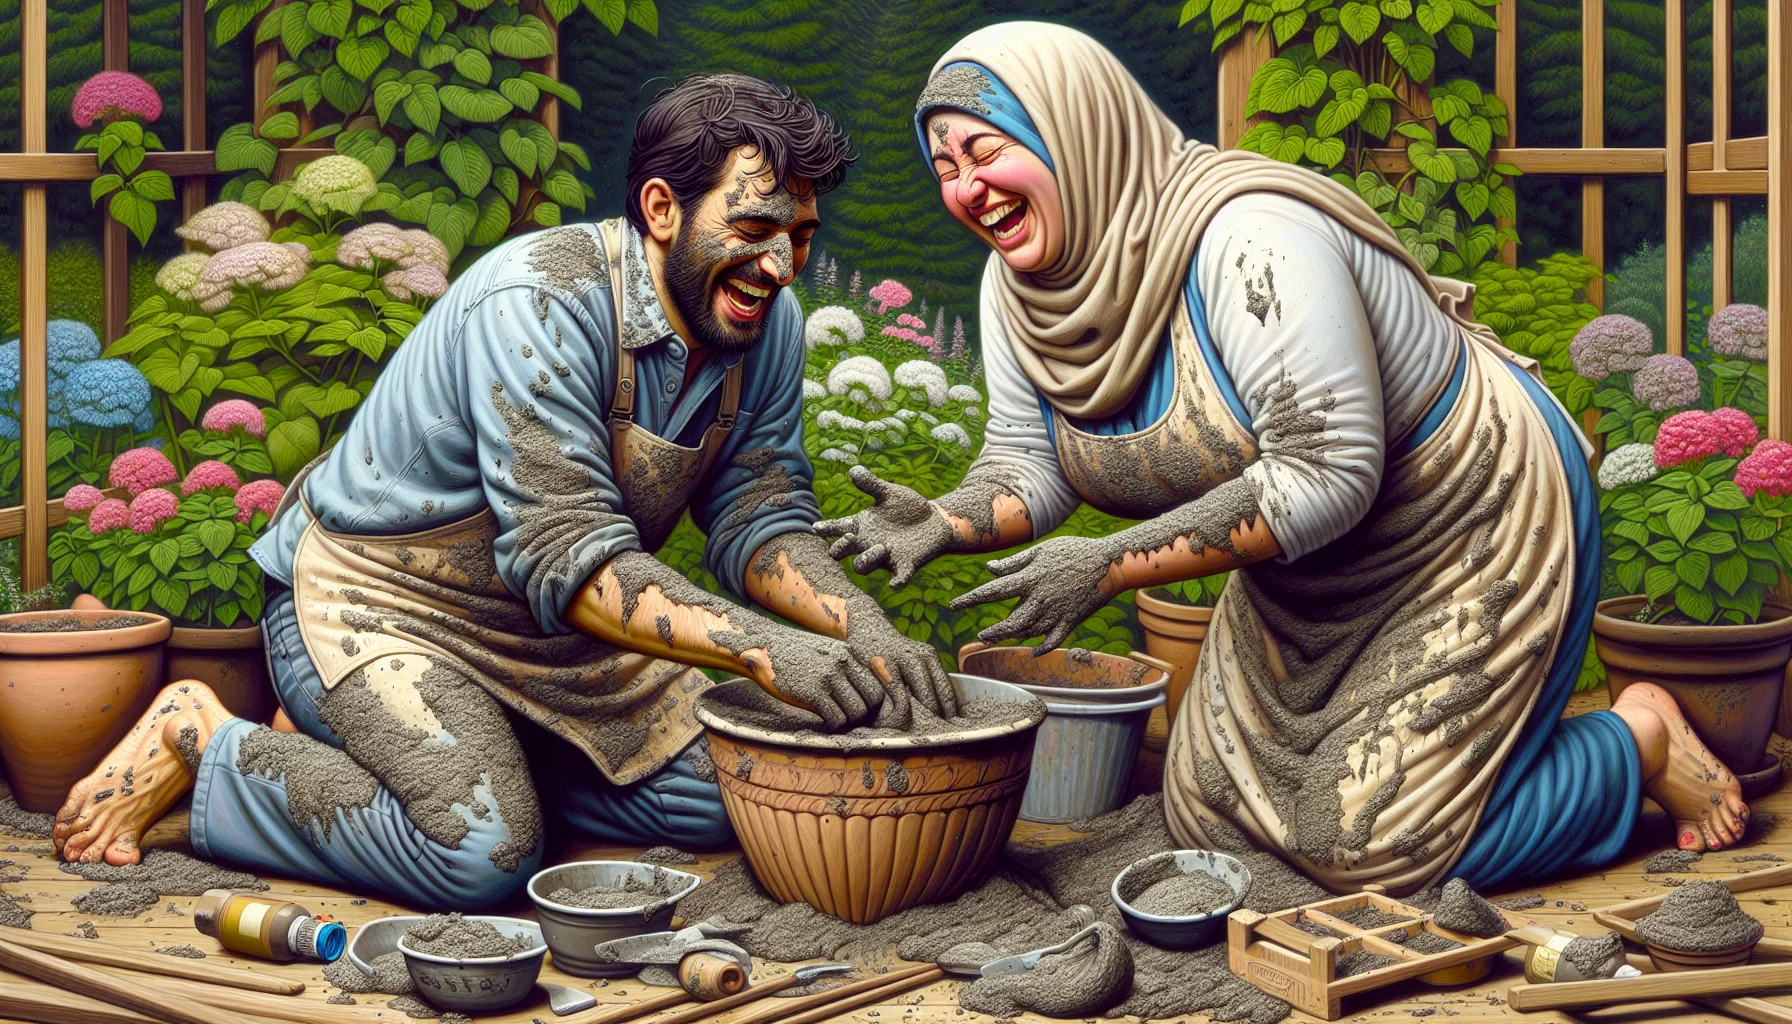 Detailed scene of a humorous horticultural scenario. In a lush garden, two individuals of varying descents, a Middle-Eastern woman and a Hispanic man, are engaged in the delightful task of crafting with Hypertufa recipes. They are accidentally covered in Hypertufa mix, with streaks of the material on their clothes and faces. Their laughter is infectious as they continue their task. The overall scene conveys a profound sense of enjoyment derived from gardening, inviting others to partake in this creative and fun-filled hobby.